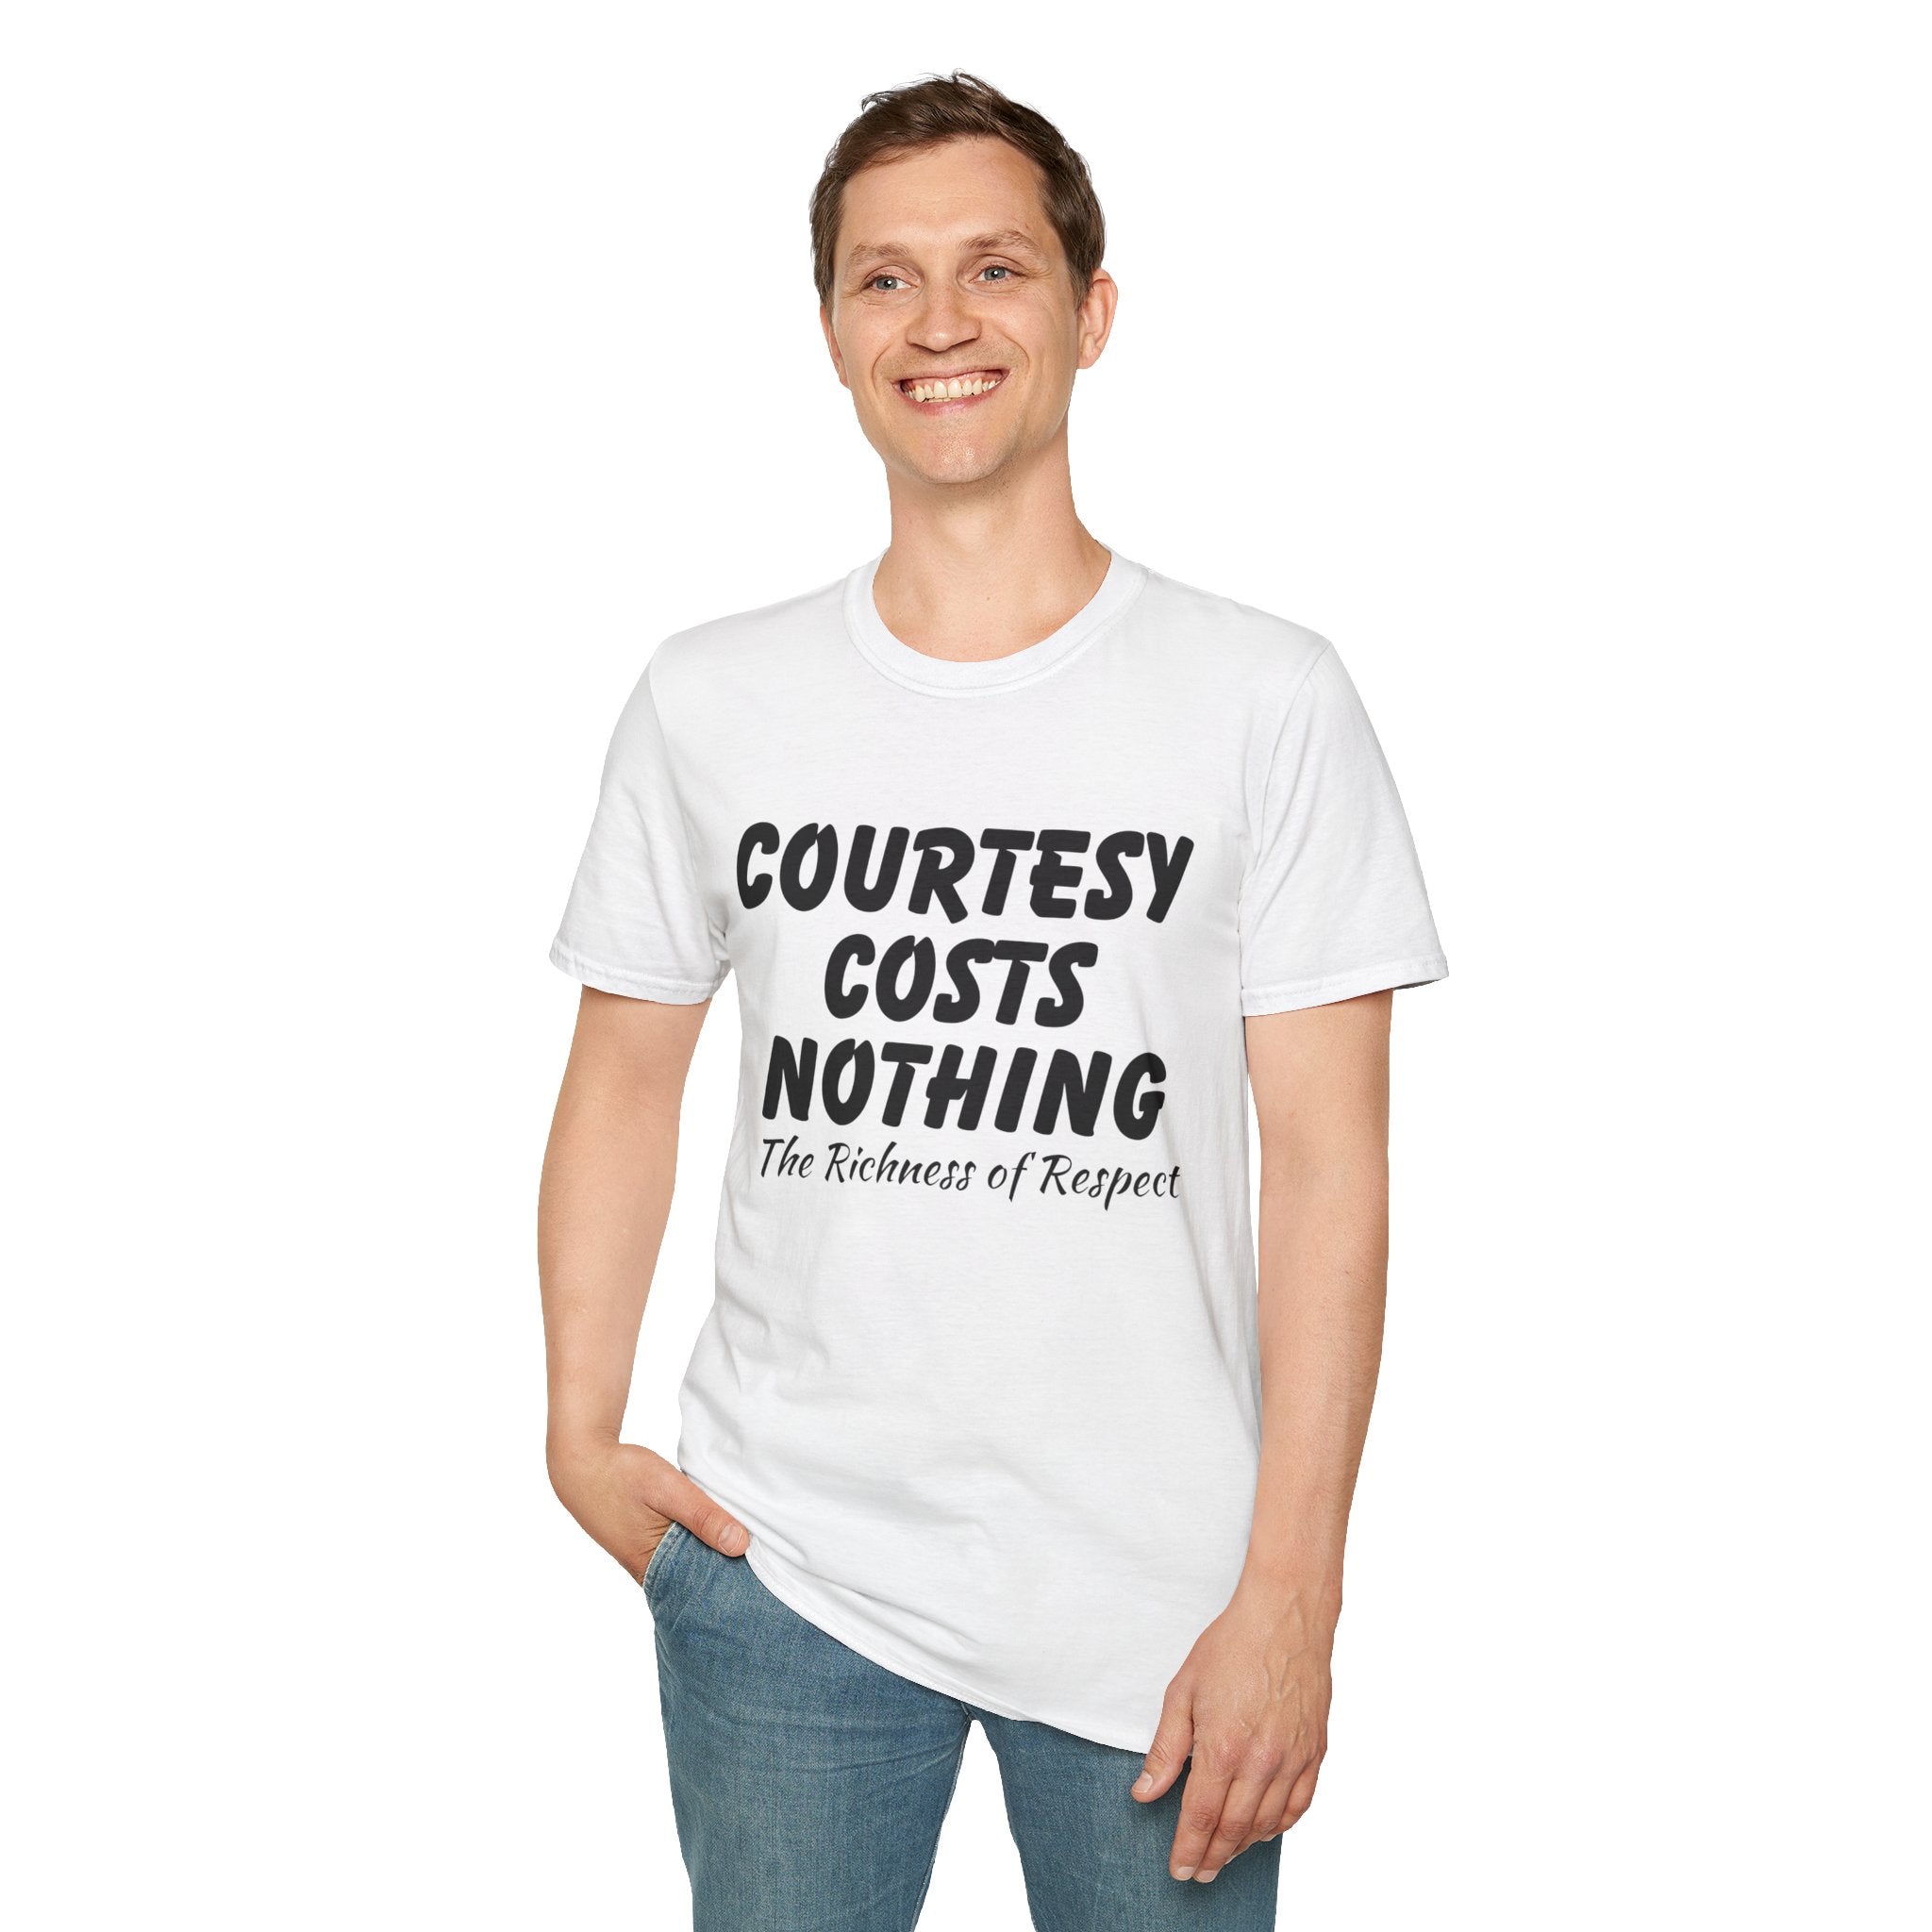 Courtesy Cost Nothing T-shirt, Spread Courtesy, Awareness T-Shirt, Courtesy Is Contagious, Stop Bullying, Anti-Bullying Shirt, Richness of Respect, Kindness